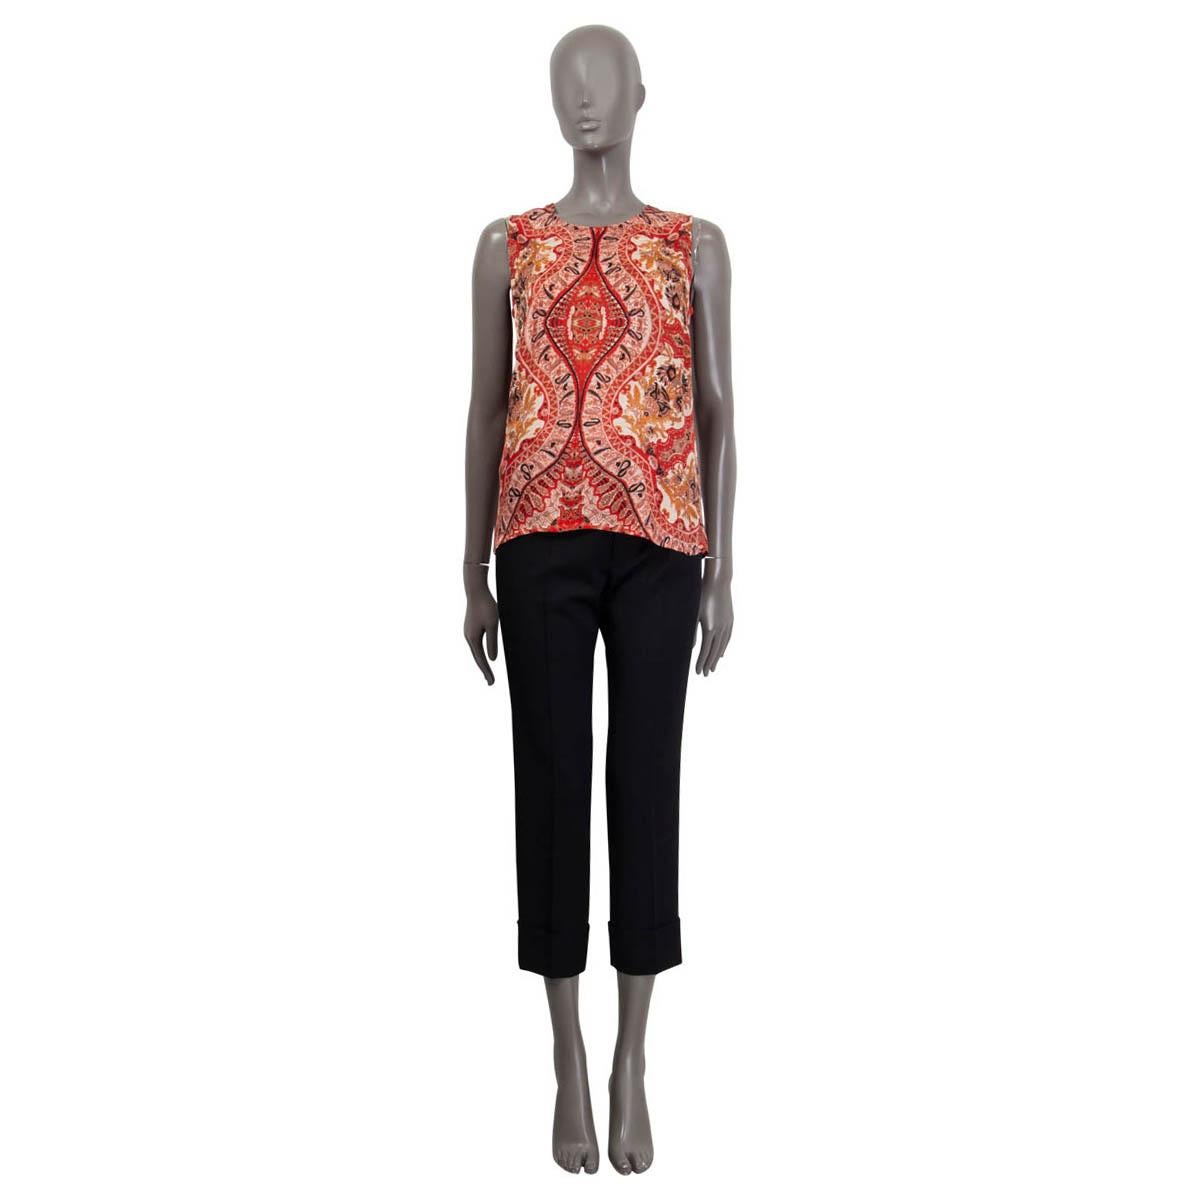 100% authentic Etro tank-top in red, mustard, off-white and black viscose (65%) and silk (35%). Opens with eight buttons at the back. Unlined. Has been worn and is in excellent condition. 

Matching skirt available in separate